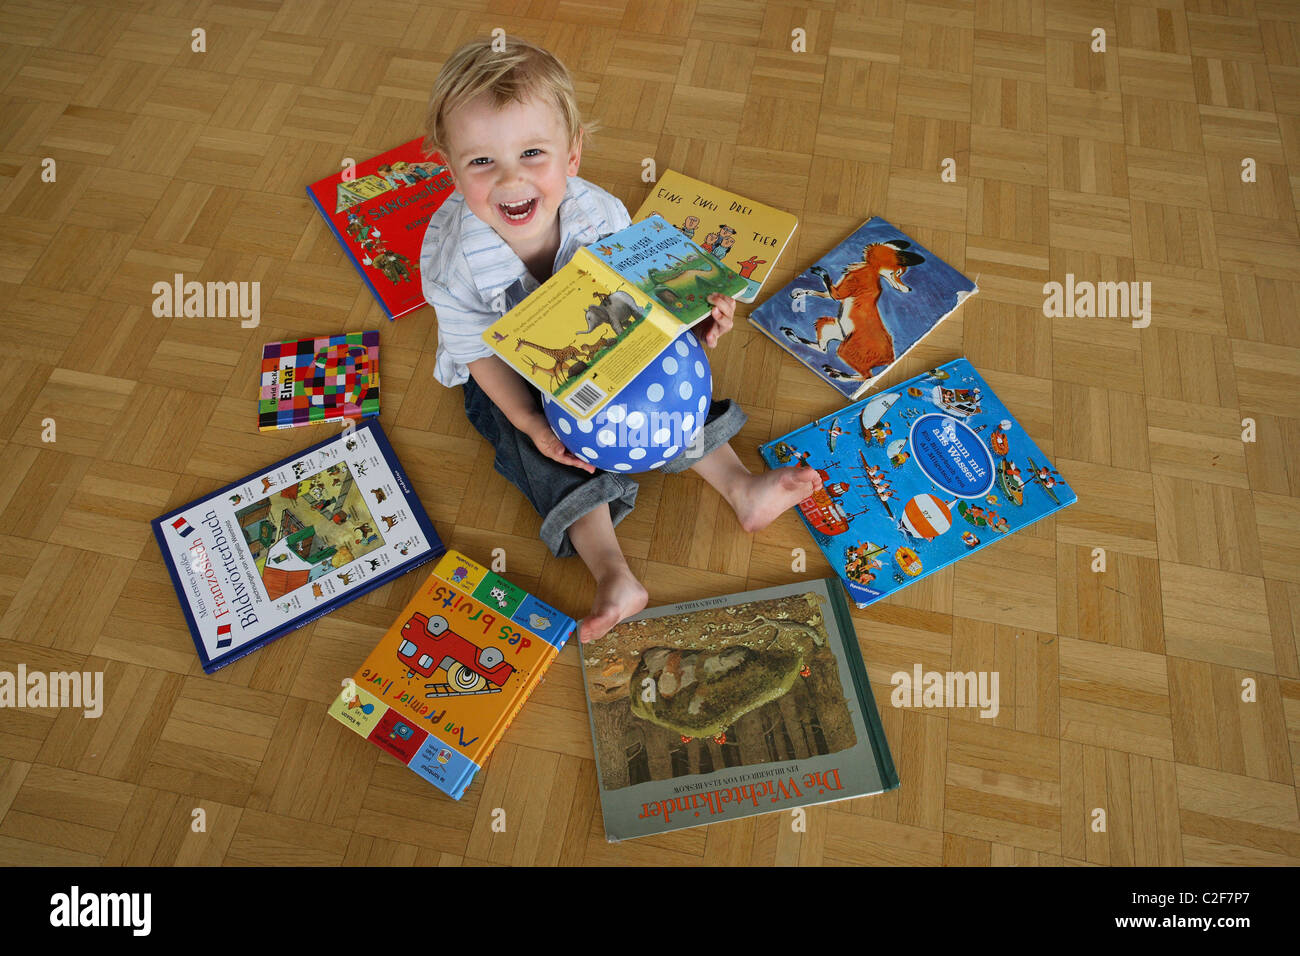 boy with books Stock Photo